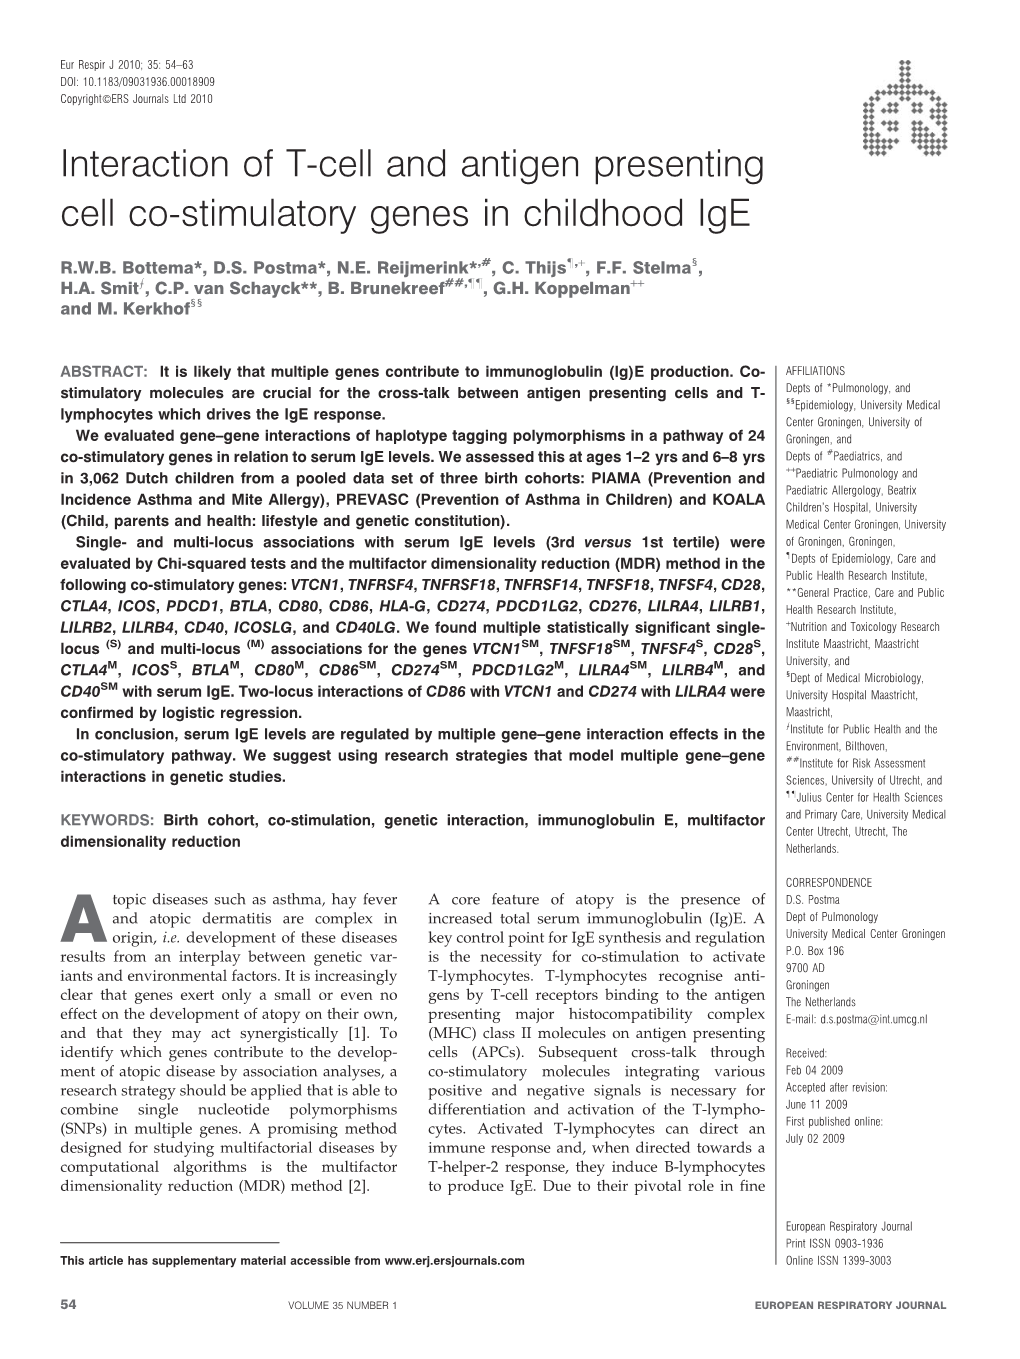 Interaction of T-Cell and Antigen Presenting Cell Co-Stimulatory Genes in Childhood Ige